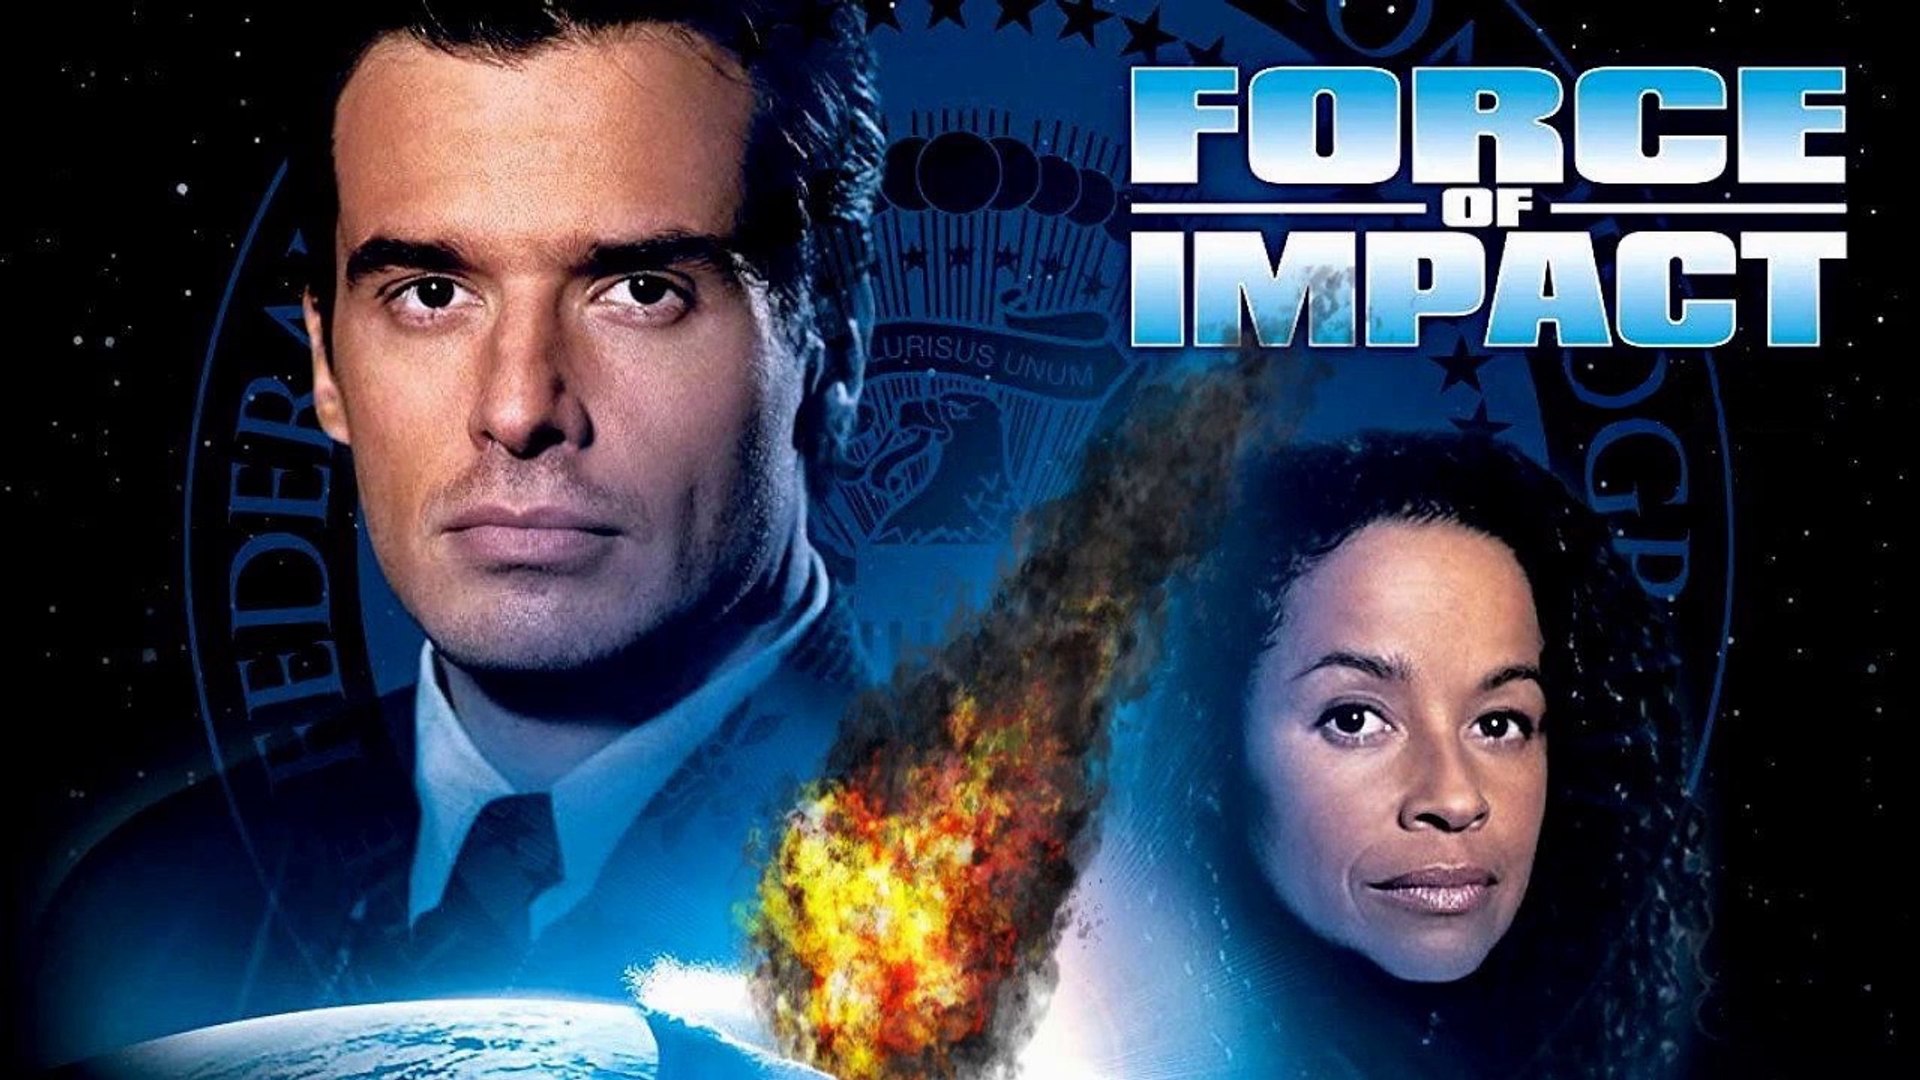 Force of Impact (disaster movie, 2005) (ENG) HD - Video Dailymotion